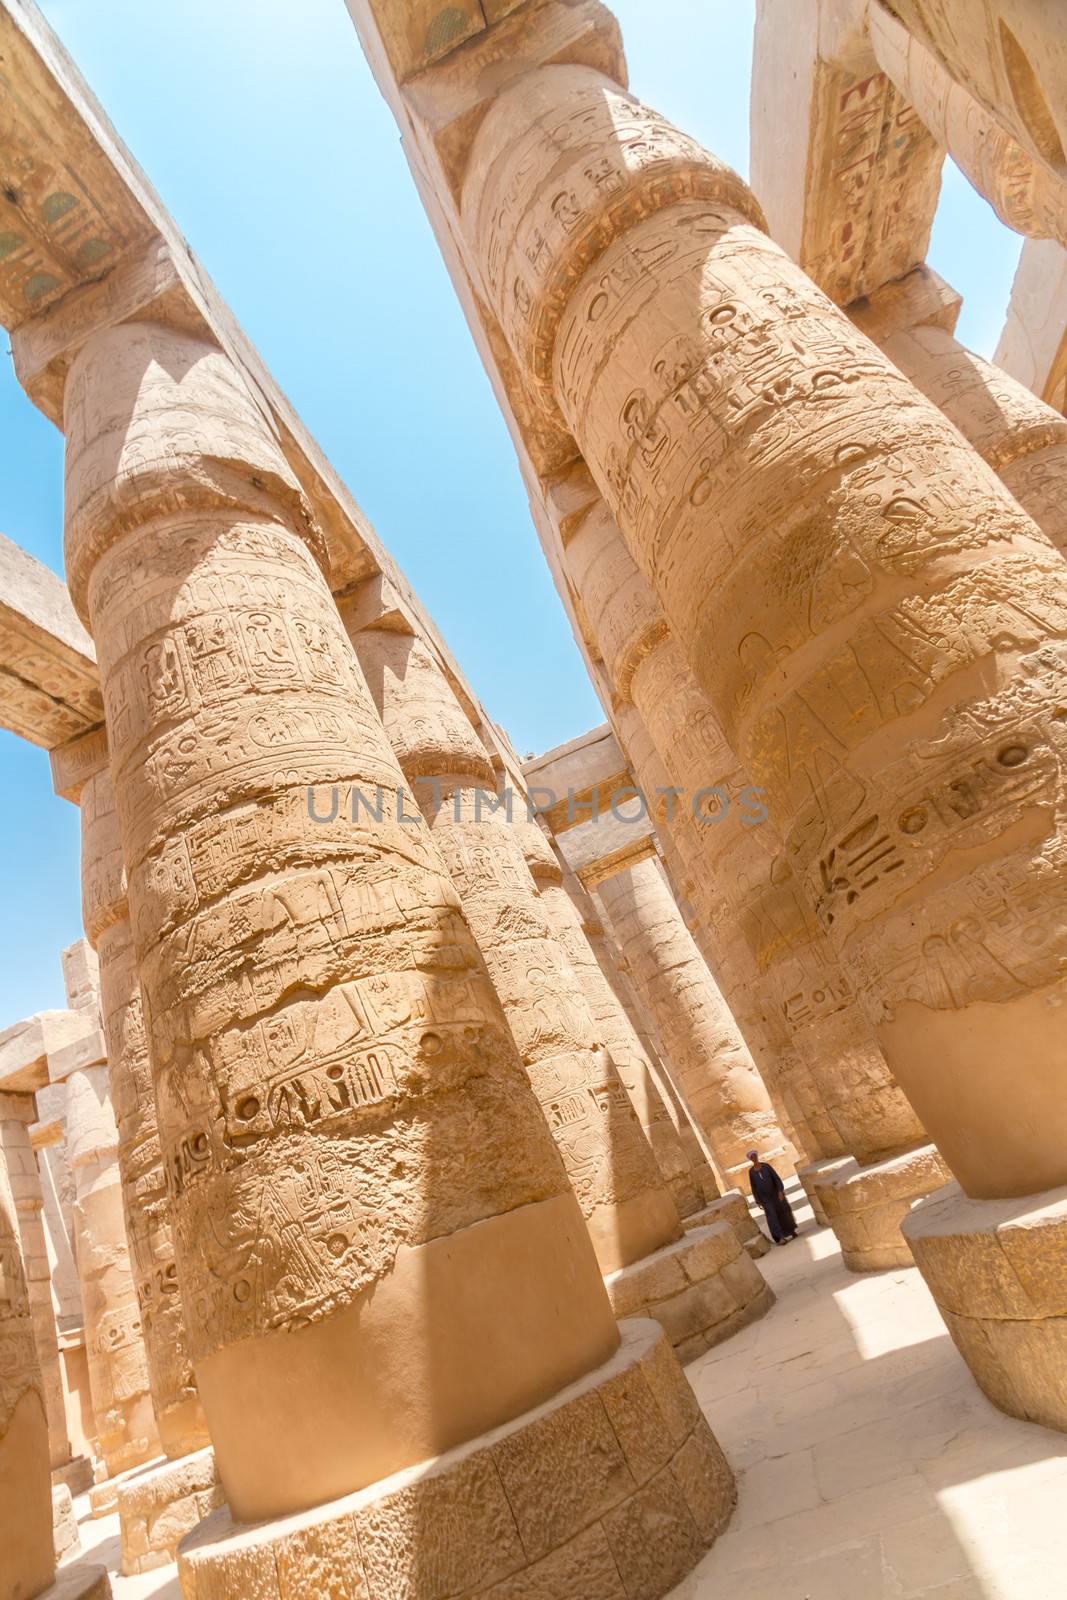 Great Hypostyle Hall and at the Temples of Karnak (ancient Thebes). Luxor, Egypt